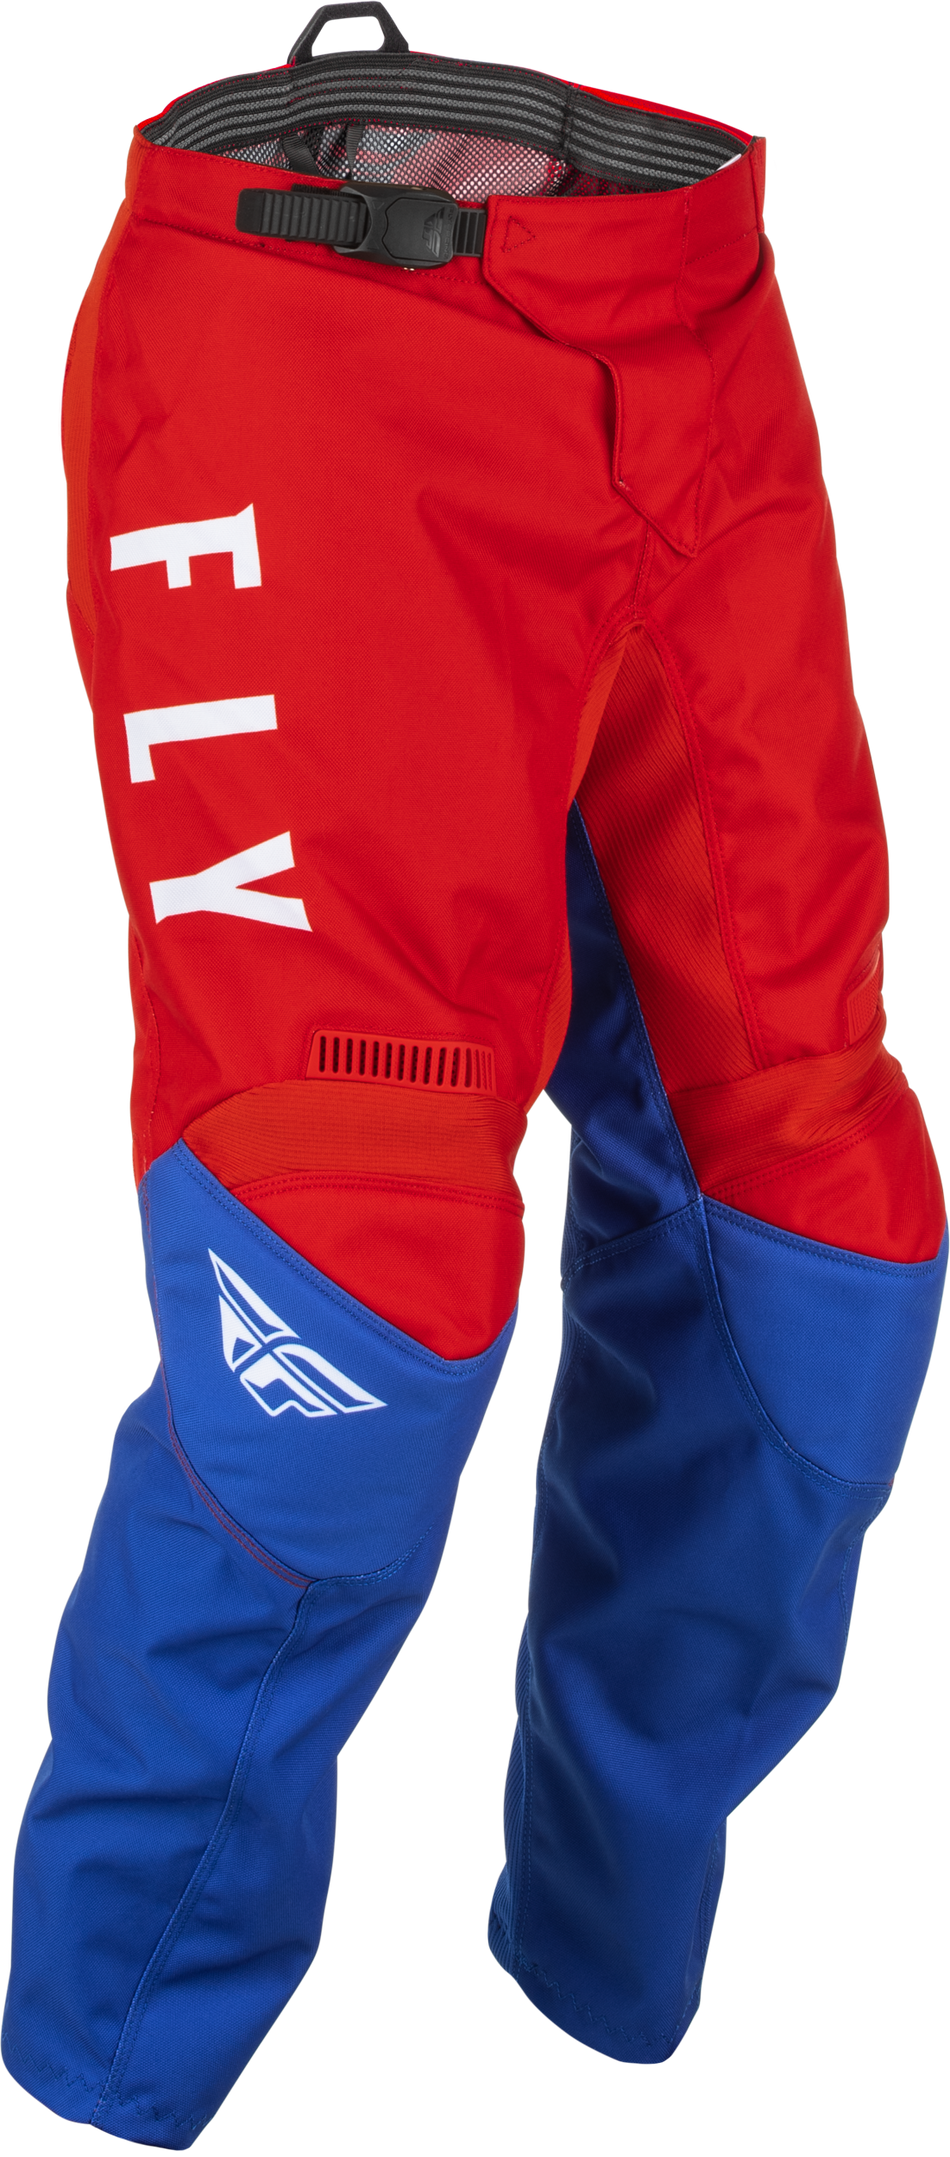 FLY RACING Youth F-16 Pants Red/White/Blue Sz 20 375-93420